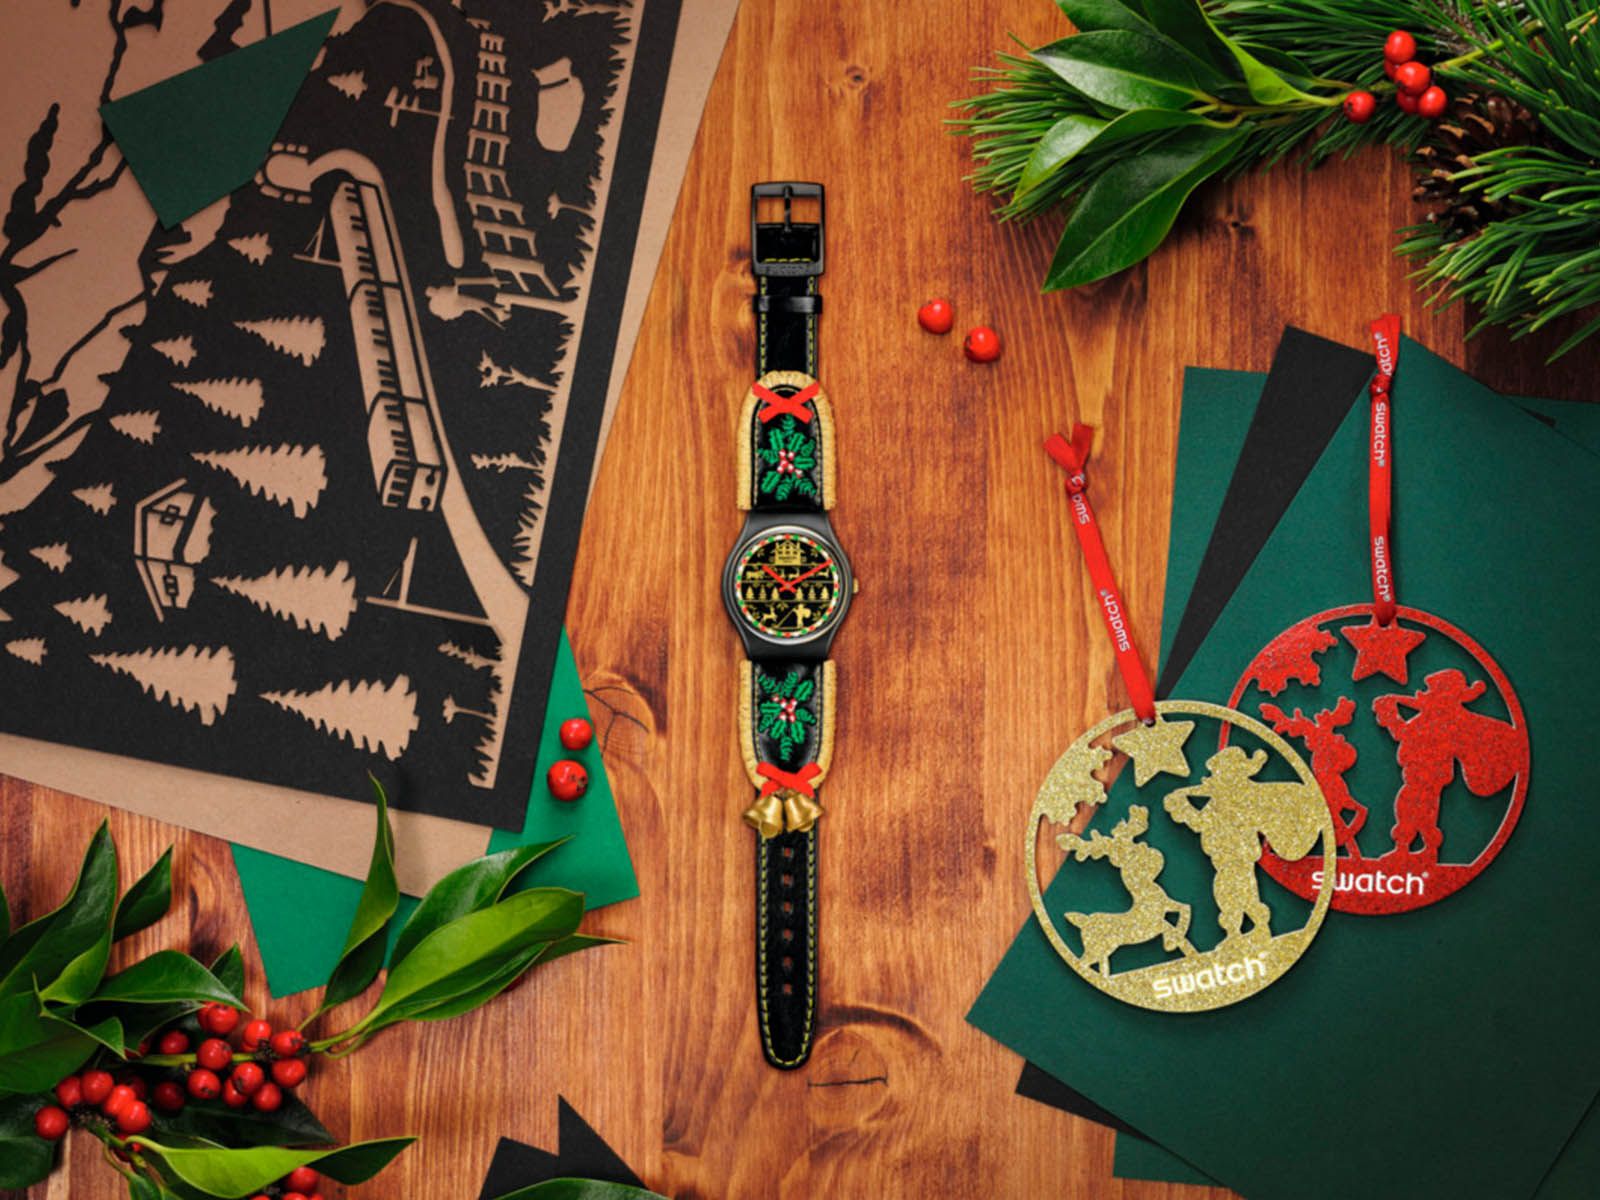 Swatch launches its most christmasy proposal